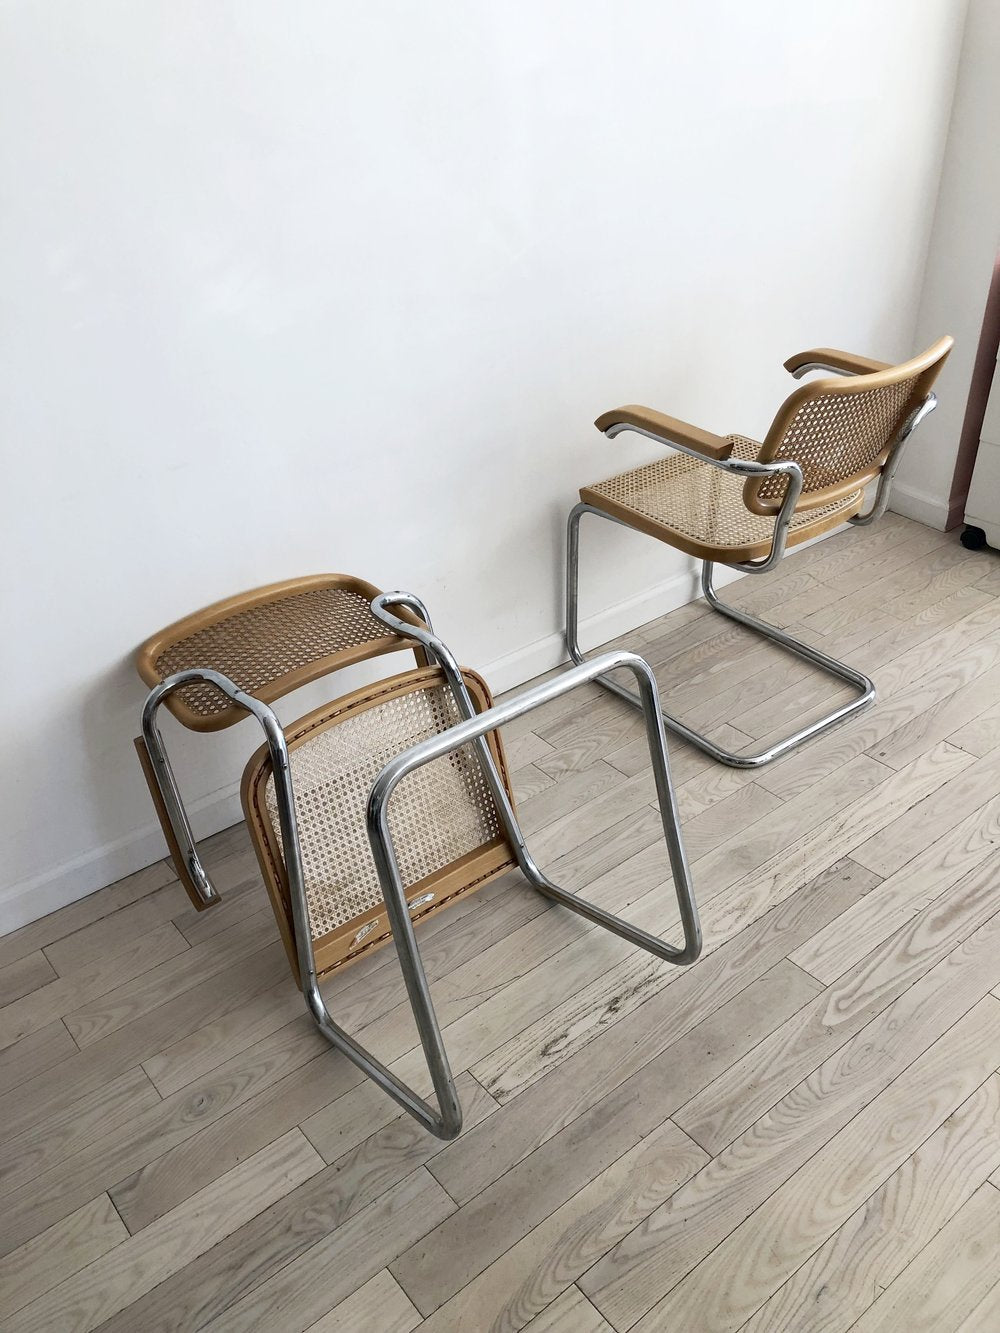 1973 Marcel Breuer Cane Cesca Armed Chairs by Knoll Produced by Gavina - PAIR